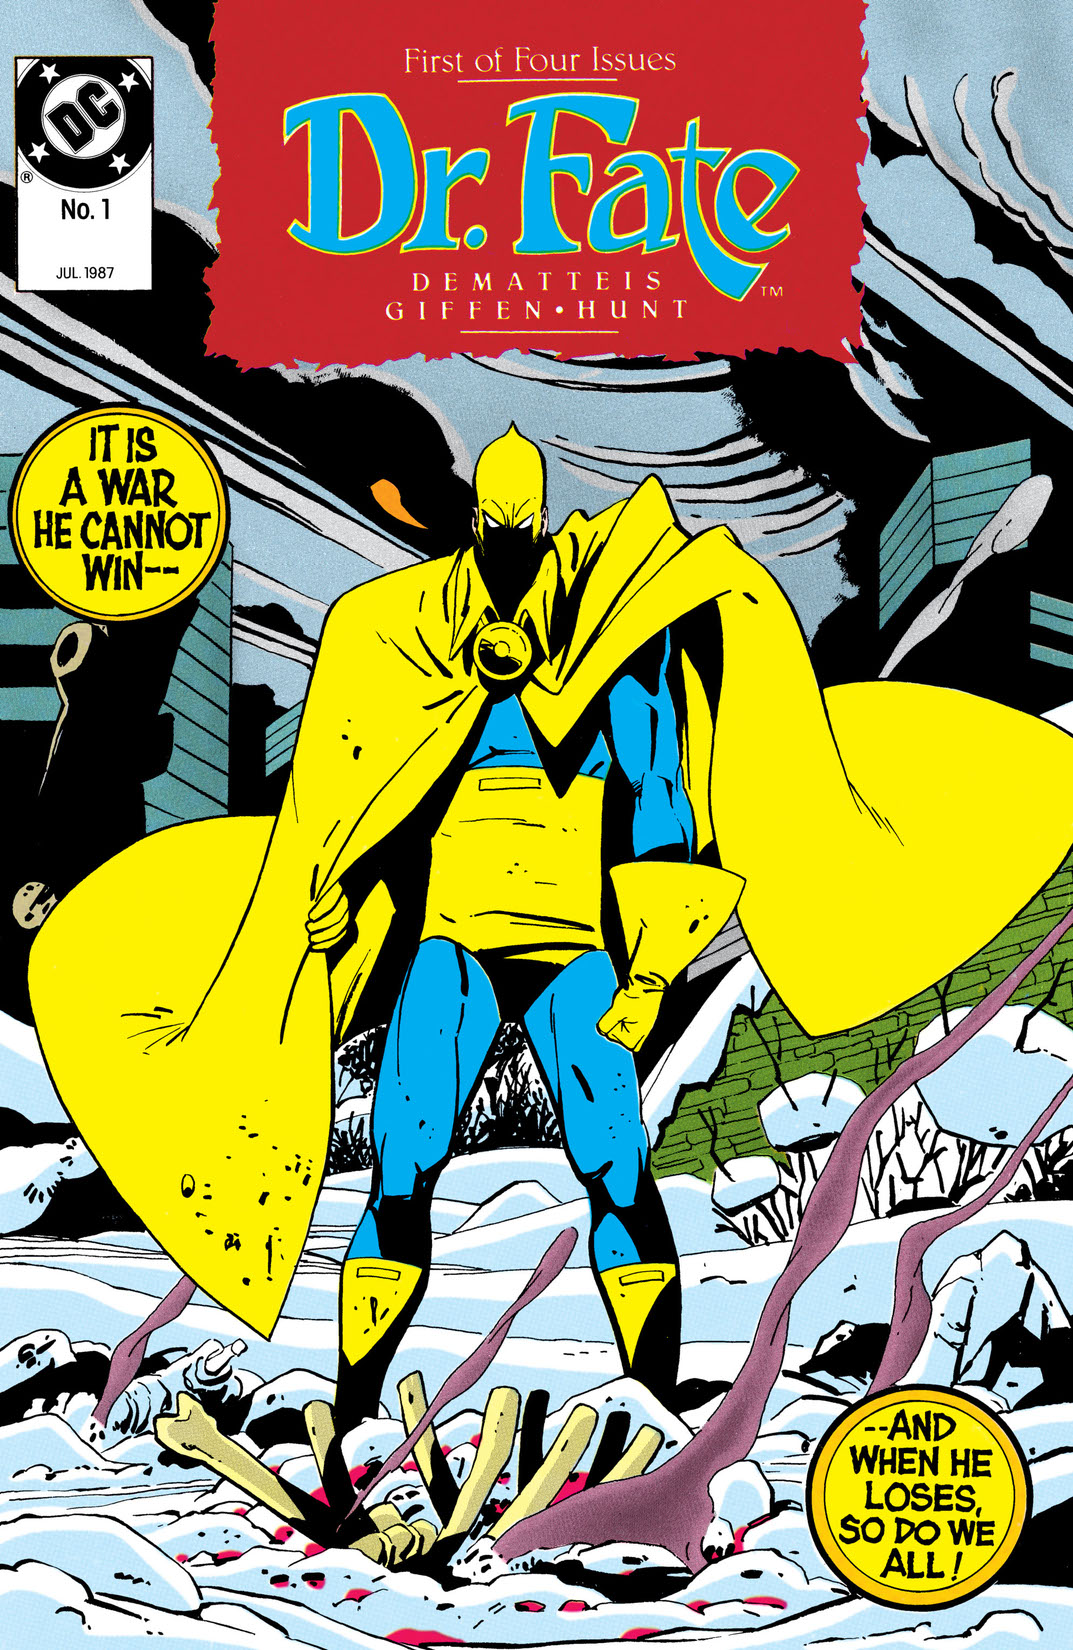 Doctor Fate (1987-) #1 preview images